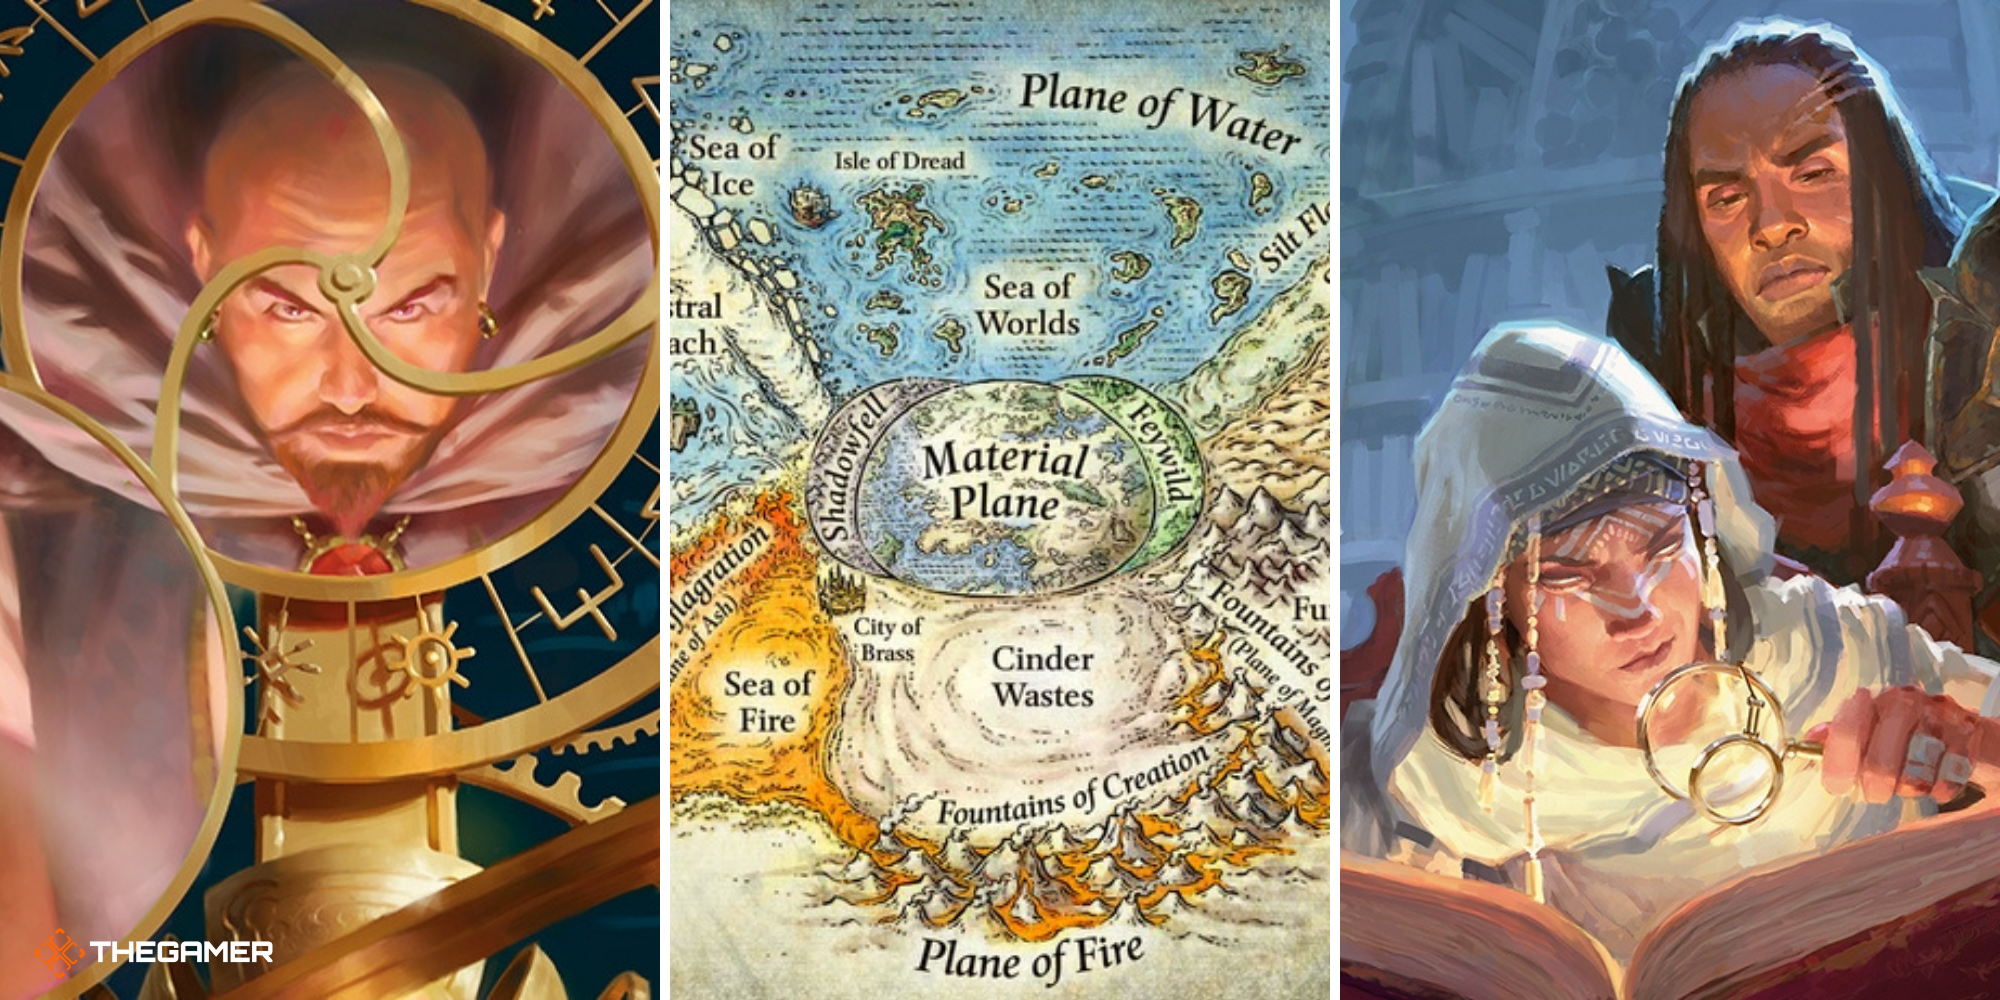 Dungeons and Dragons (Mordenkainen's tome of foes on left, Map of the elemental plane in centre, candlekeep mysteries art on right)